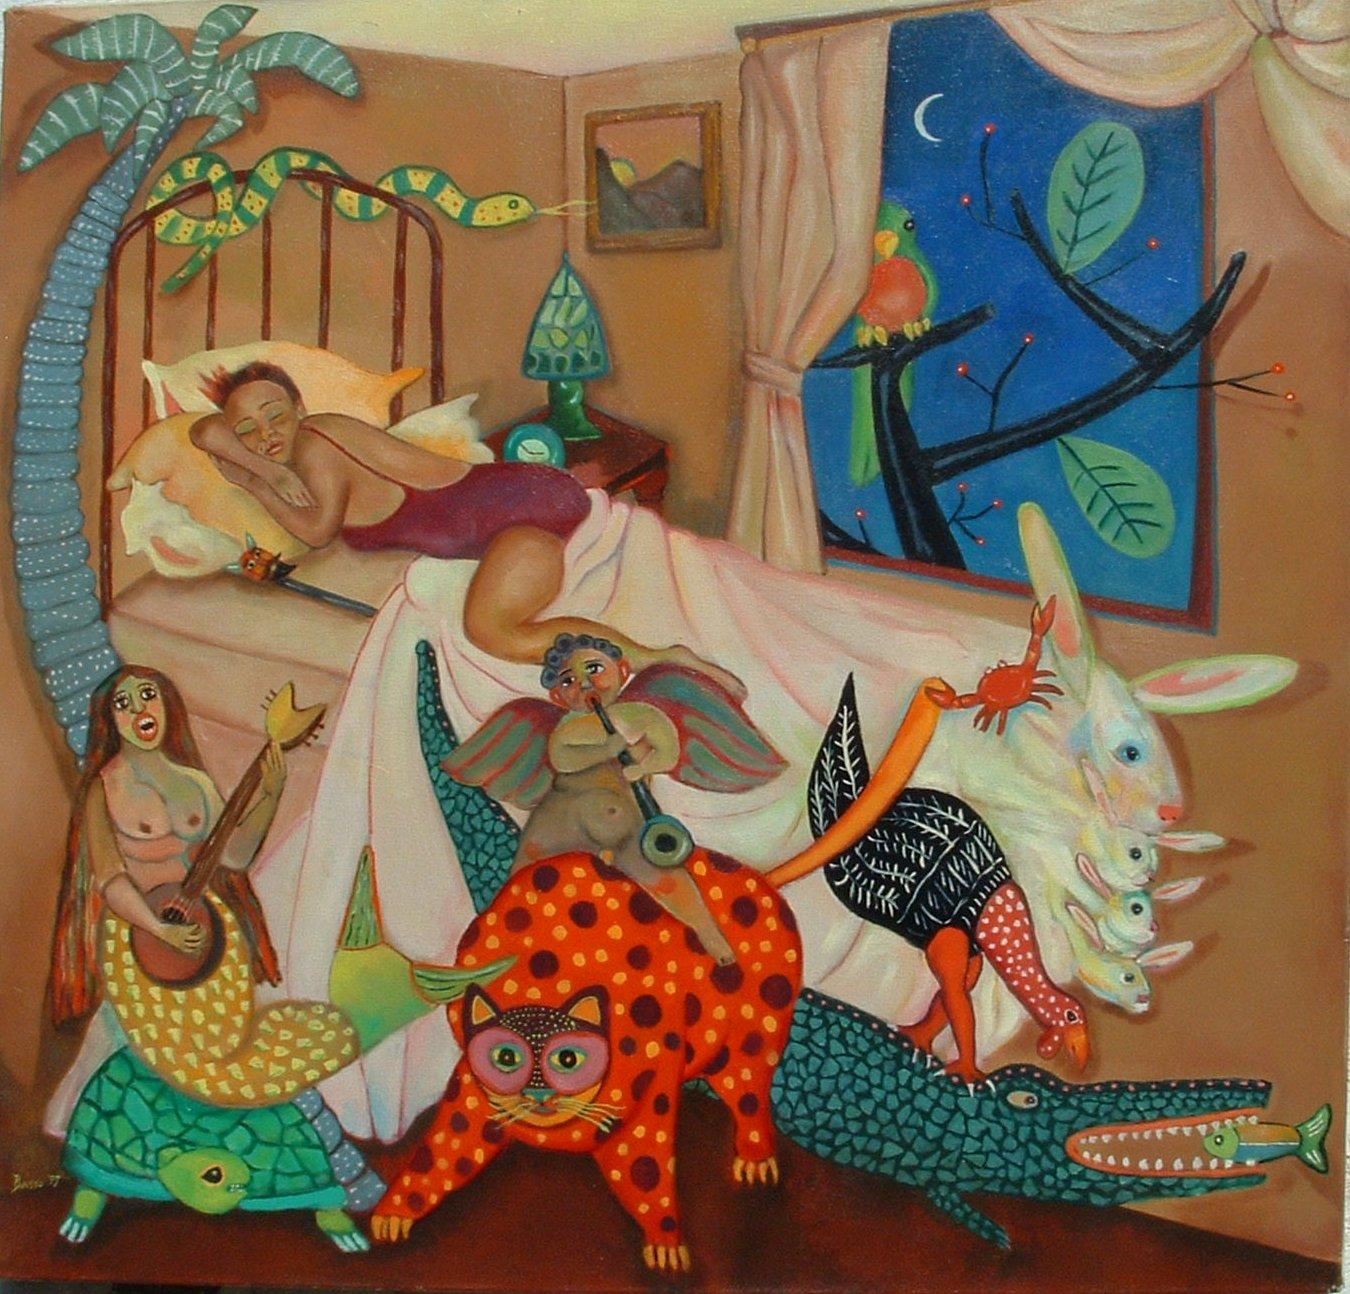 Night in Oaxaca colorful animals Mexican sculpture theme dreamlike imagery - Painting by Stephen Basso